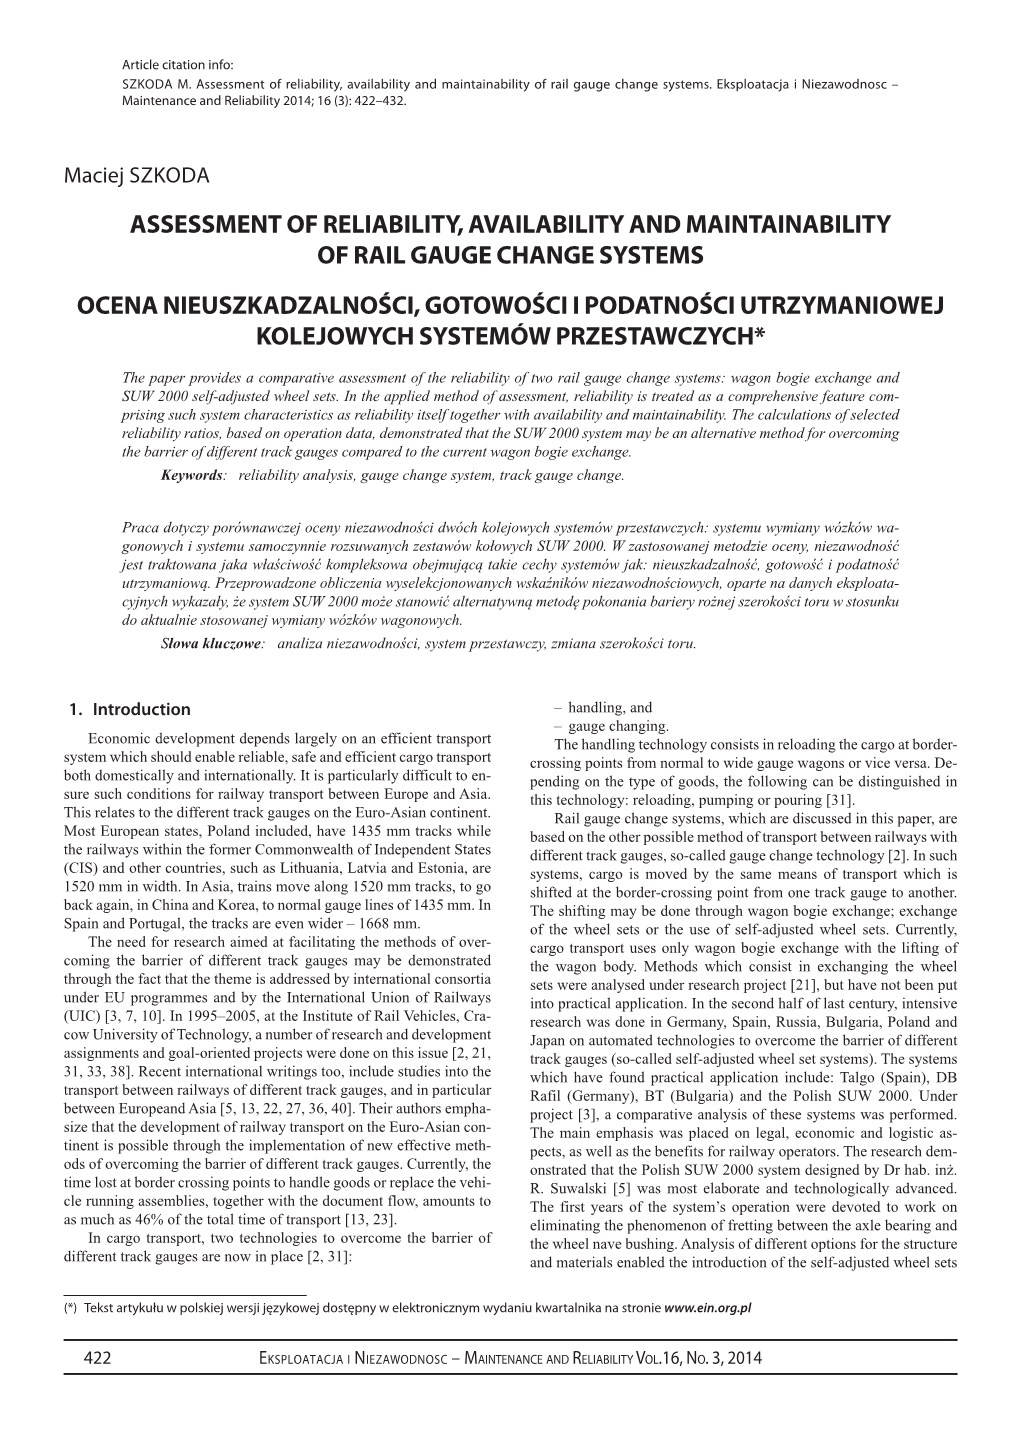 Assessment of Reliability, Availability and Maintainability of Rail Gauge Change Systems